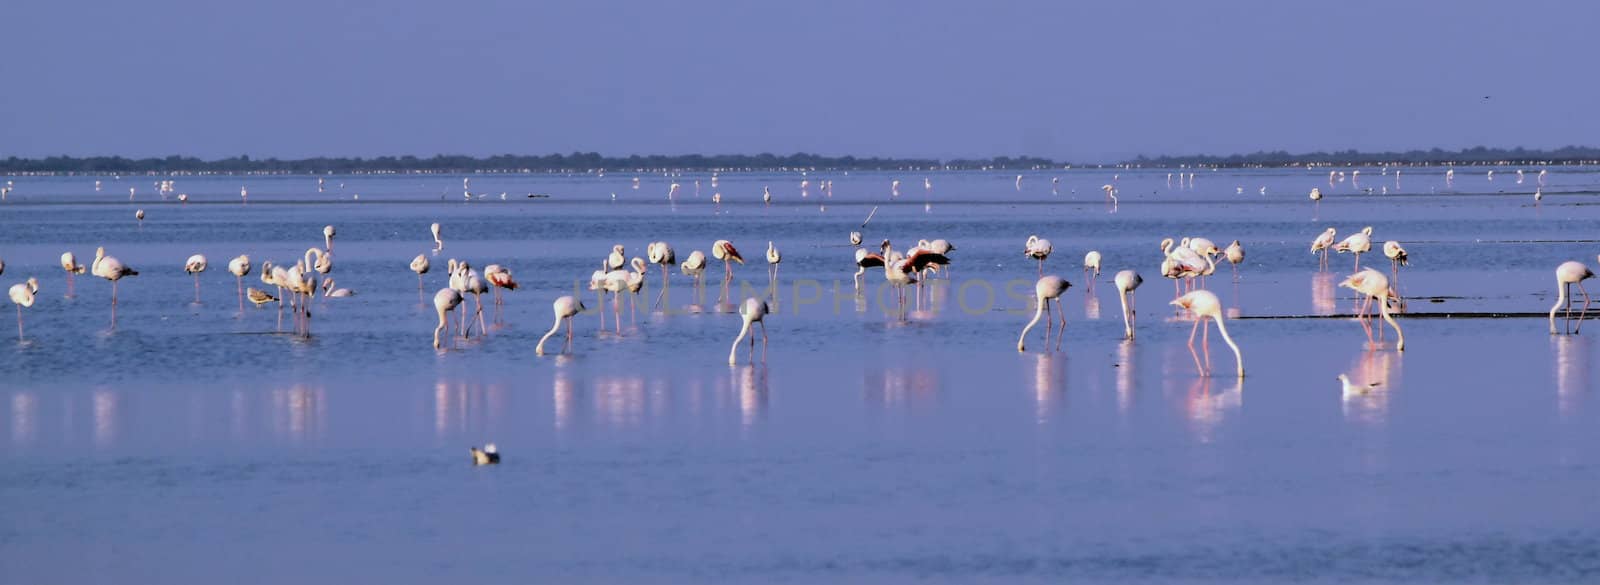 Many white flamingos eating in the water by sunset